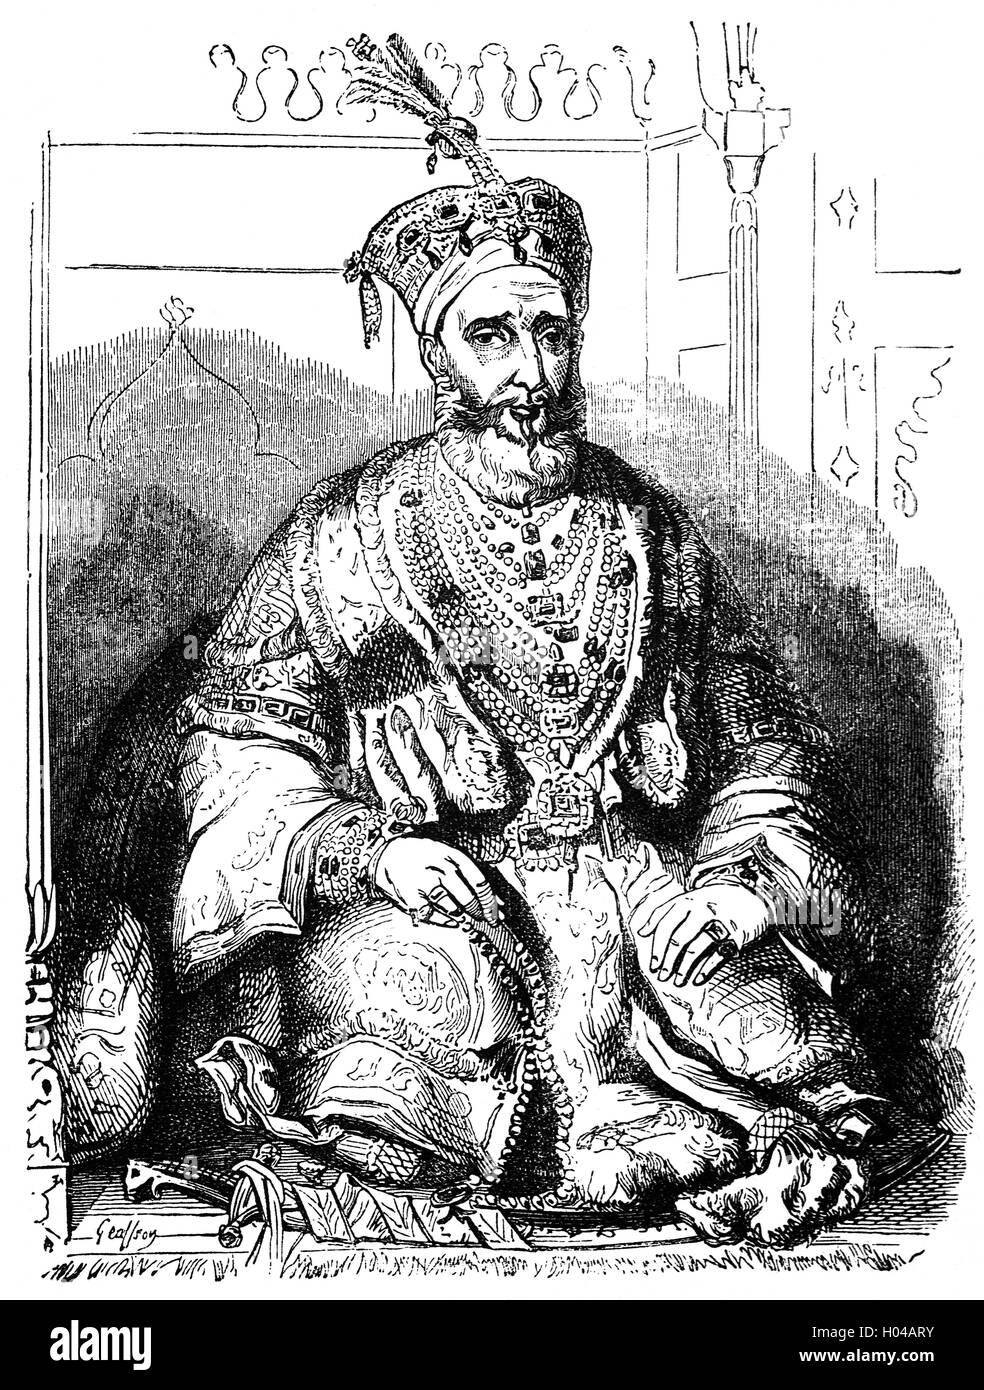 Mirza Abu Zafar Sirajuddin Muhammad Bahadur Shah Zafar was the last Mughal emperor, an  Empire that existed in name only and his authority was limited only to the city of Delhi. Following his involvement in the Indian Rebellion of 1857, the British exiled him to Rangoon in British-controlled Burma, after convicting him on conspiracy charges in a kangaroo court. Stock Photo